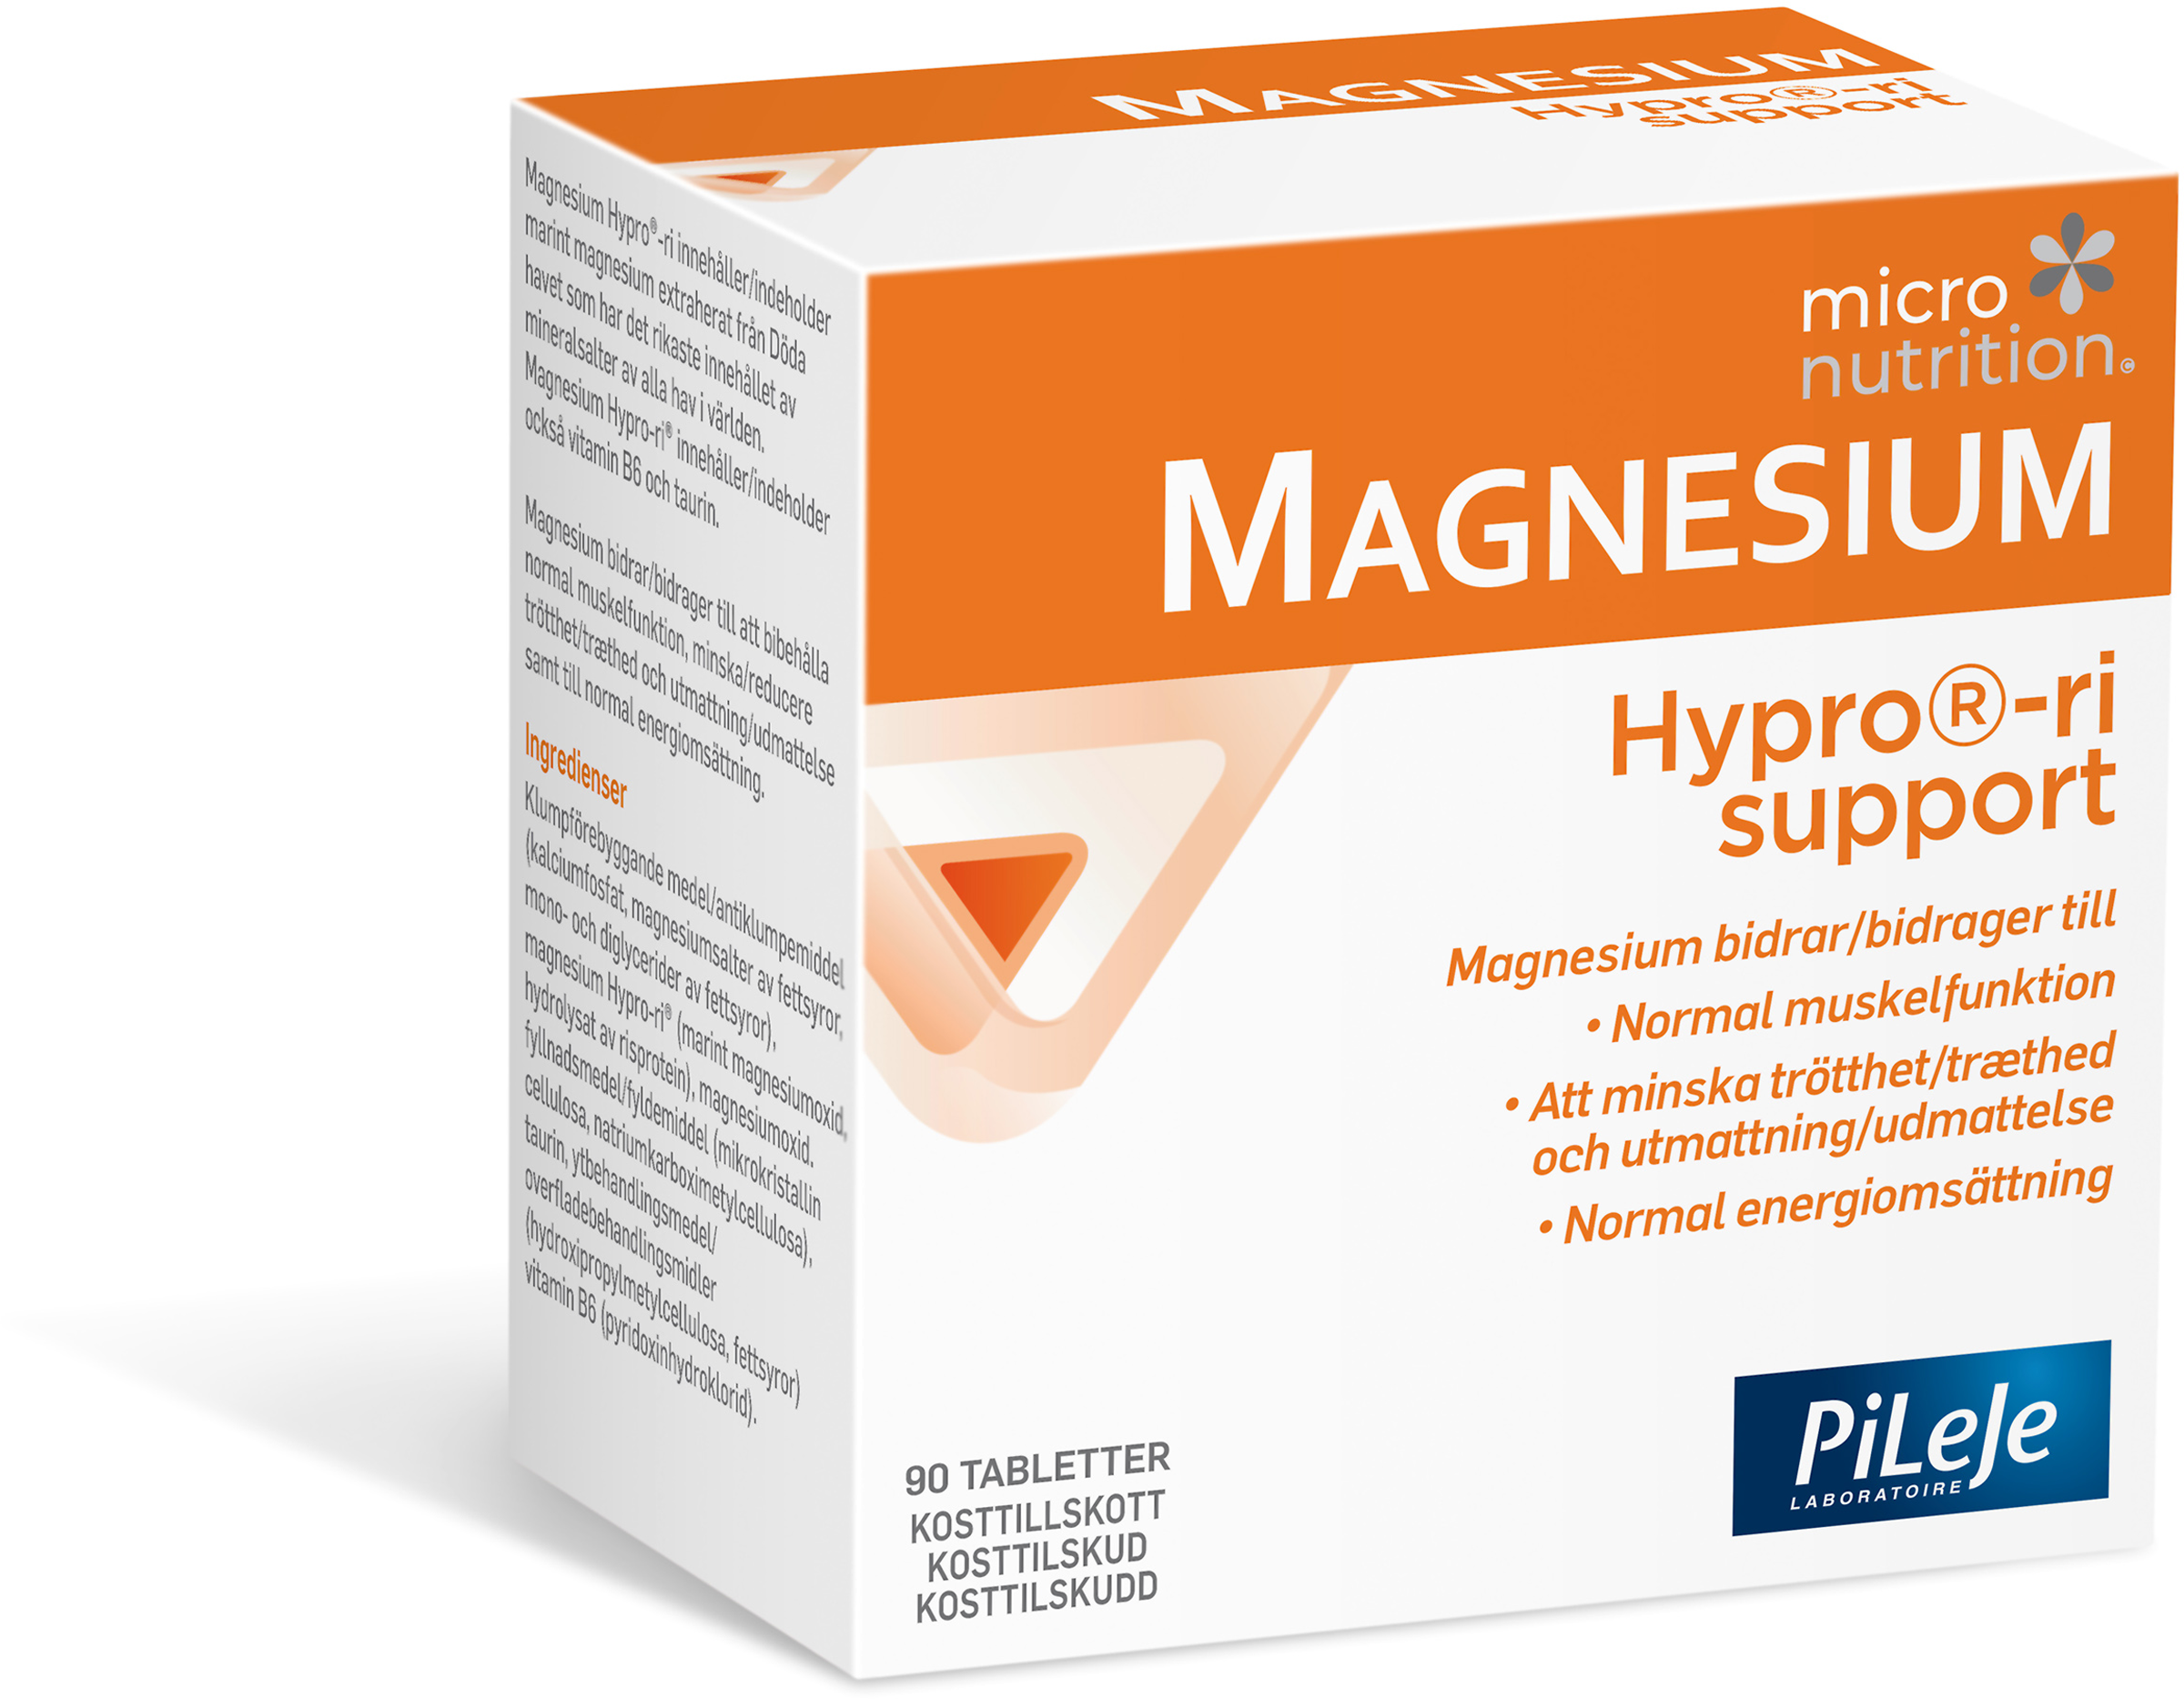 Micronutrition Magnesium Hypro-ri support 90 st